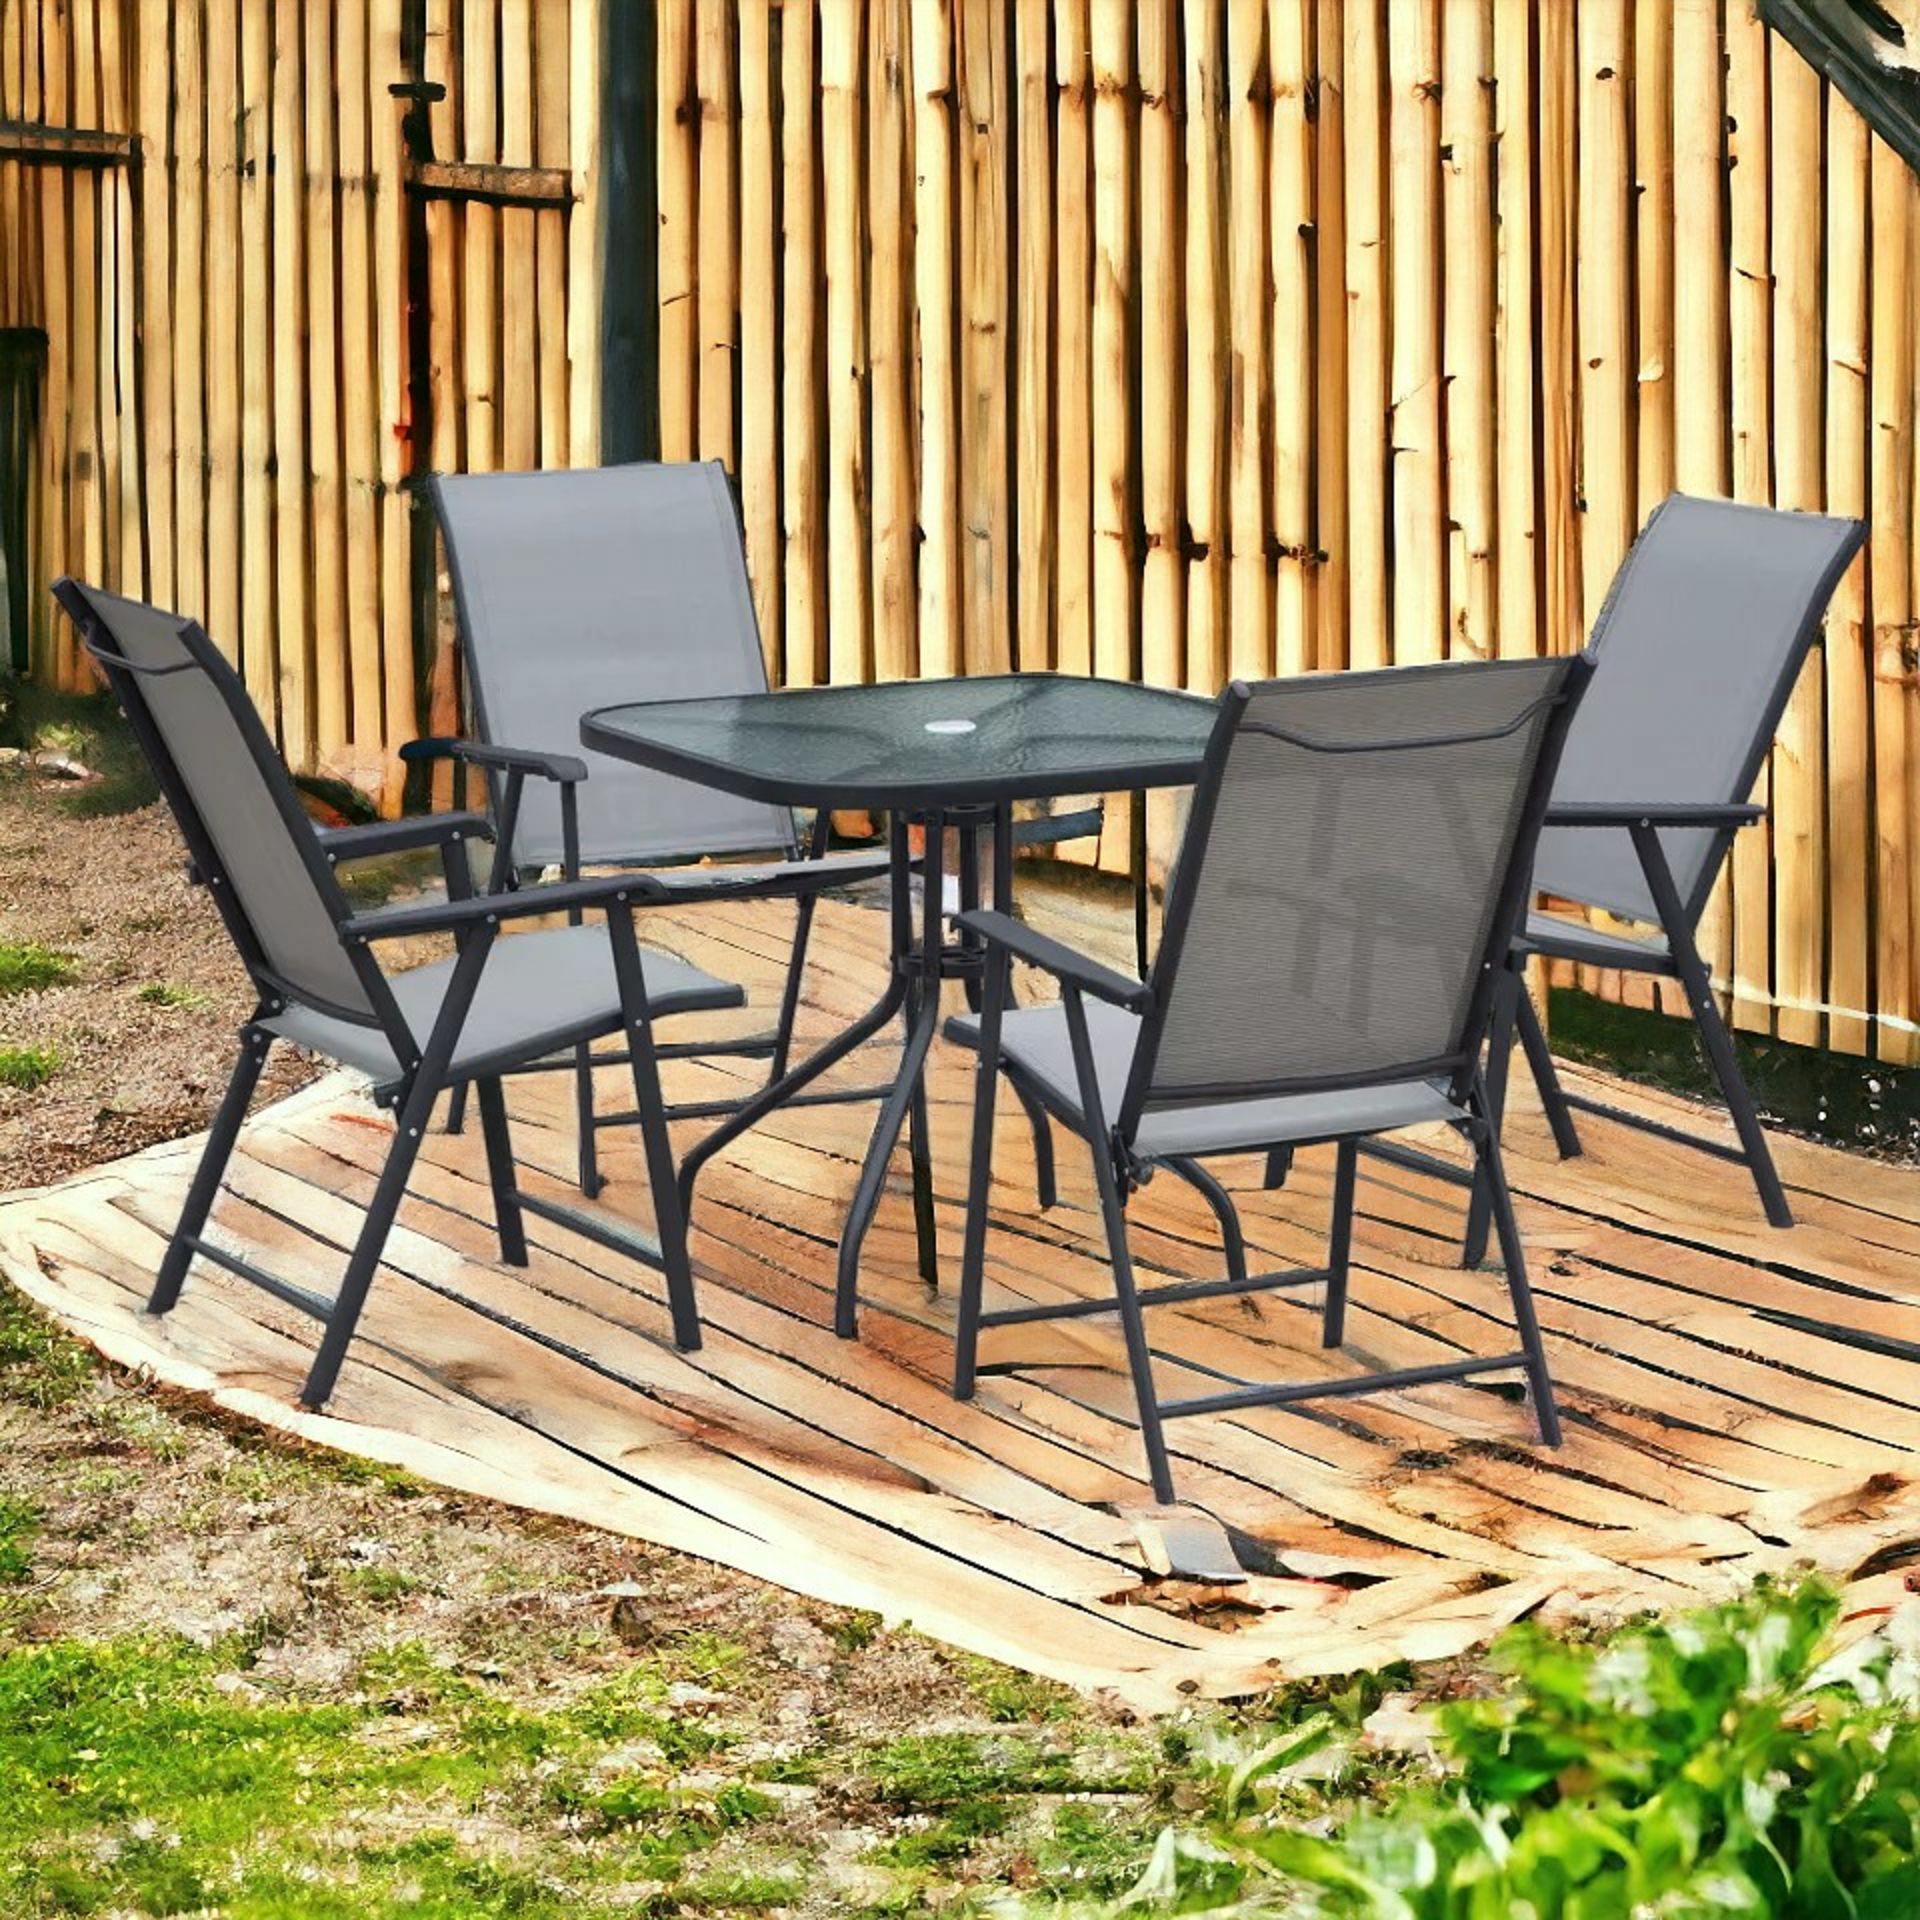 FREE DELIVERY - BRAND NEW 5PCS CLASSIC OUTDOOR DINING SET STEEL FRAMES W/ 4 CHAIRS COFFEE TABLE - Image 2 of 2